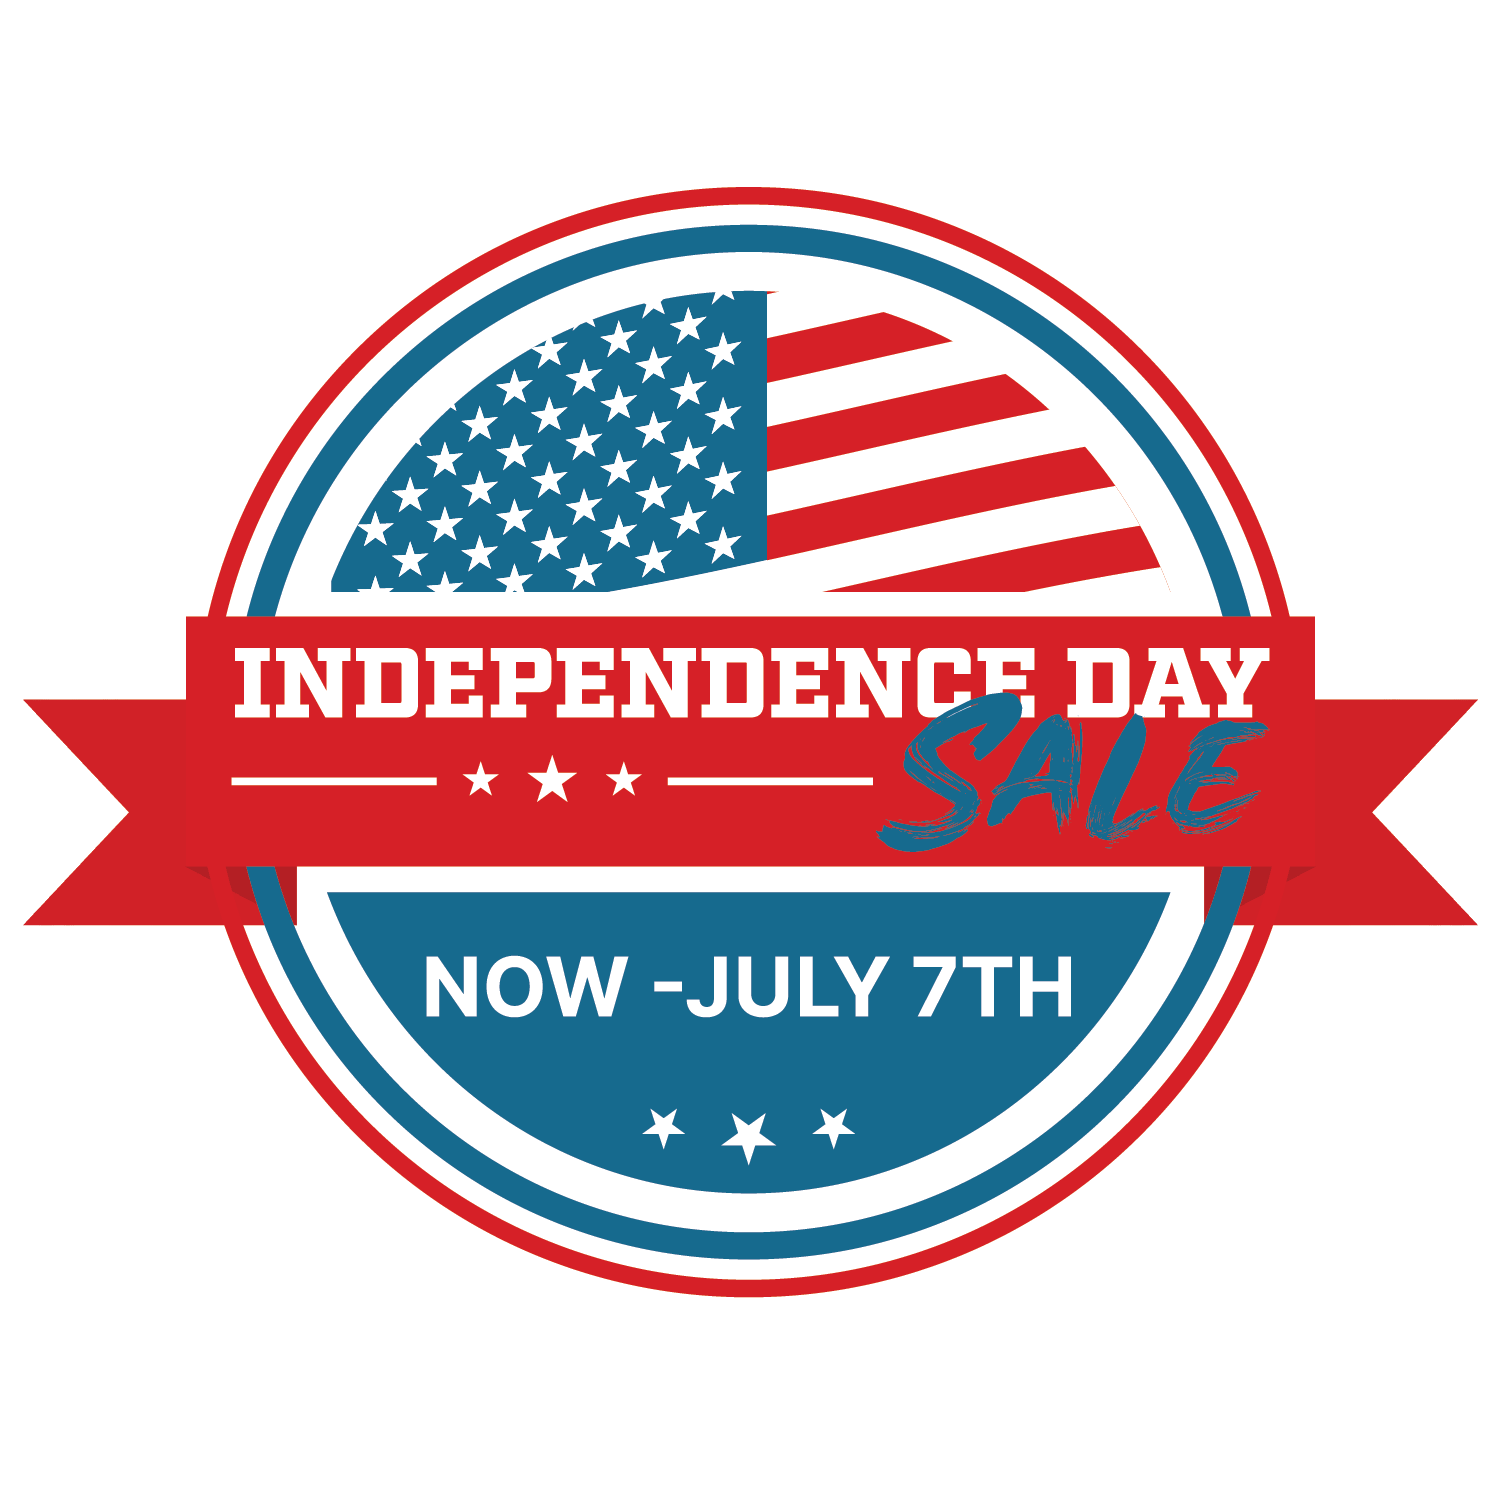 Idependence Day Sale